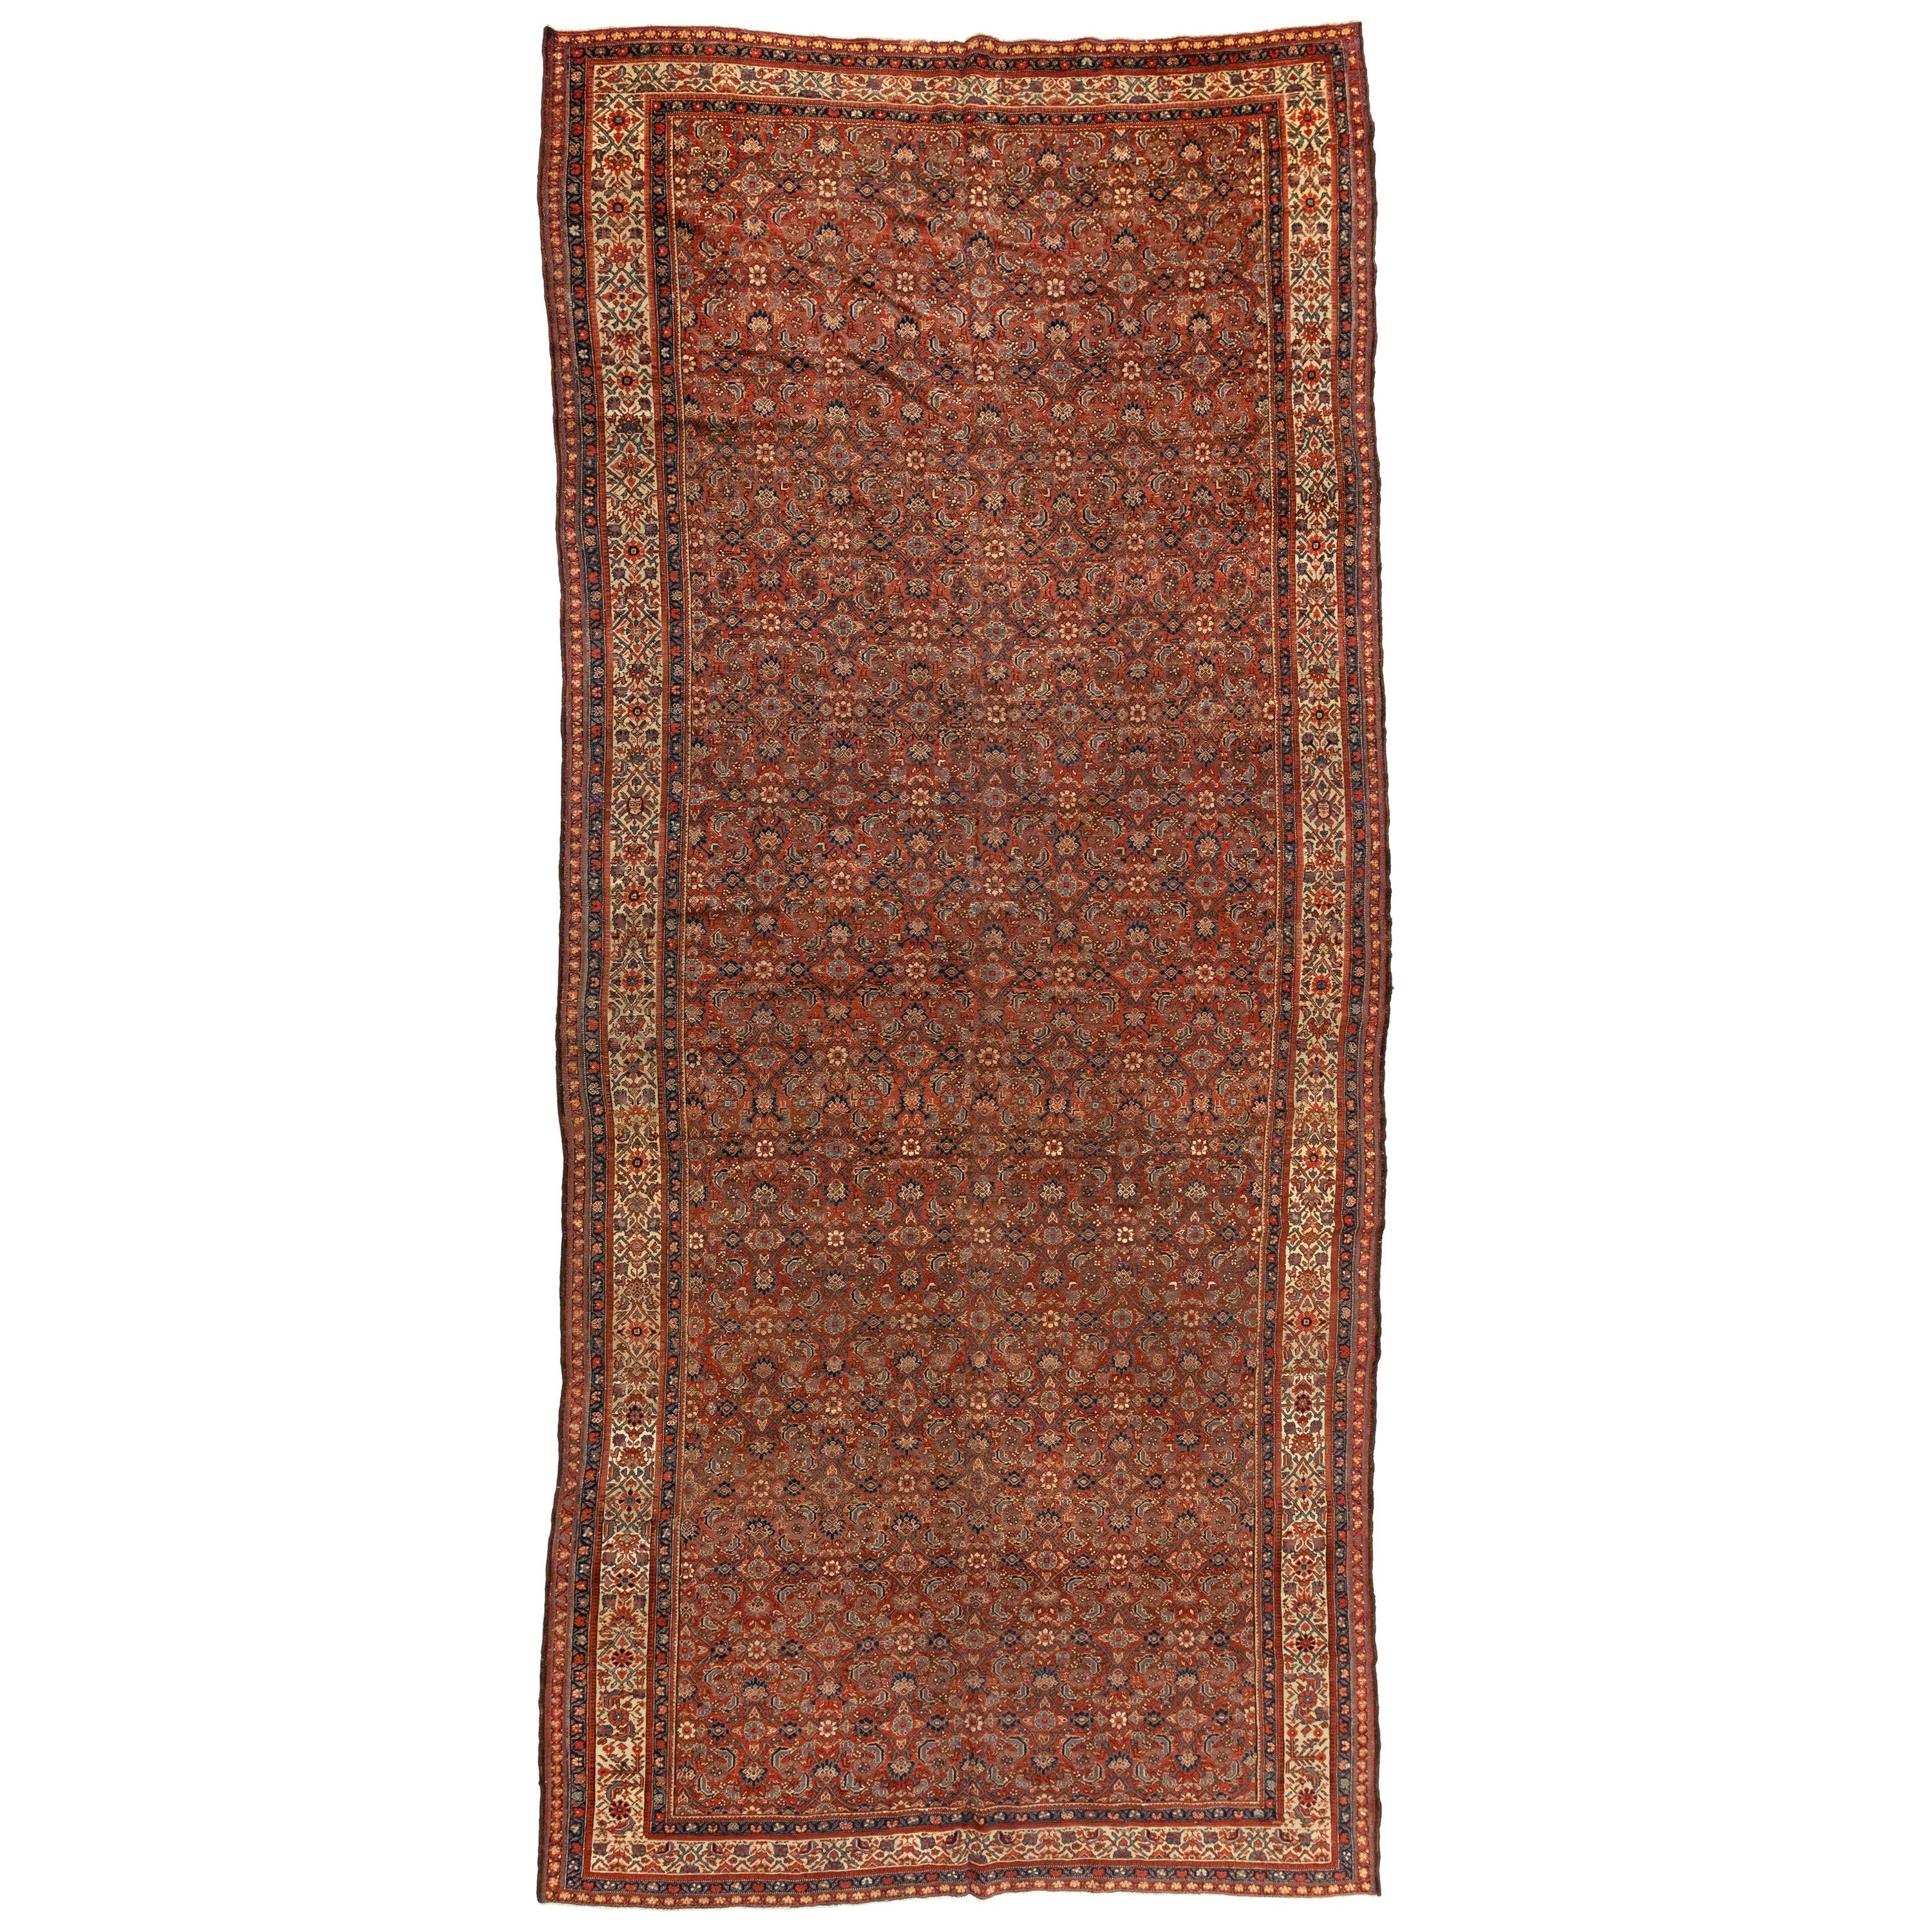 Antique Vintage Rust and Ivory Persian Floral Malayer Area Rug, circa 1910-1920s For Sale